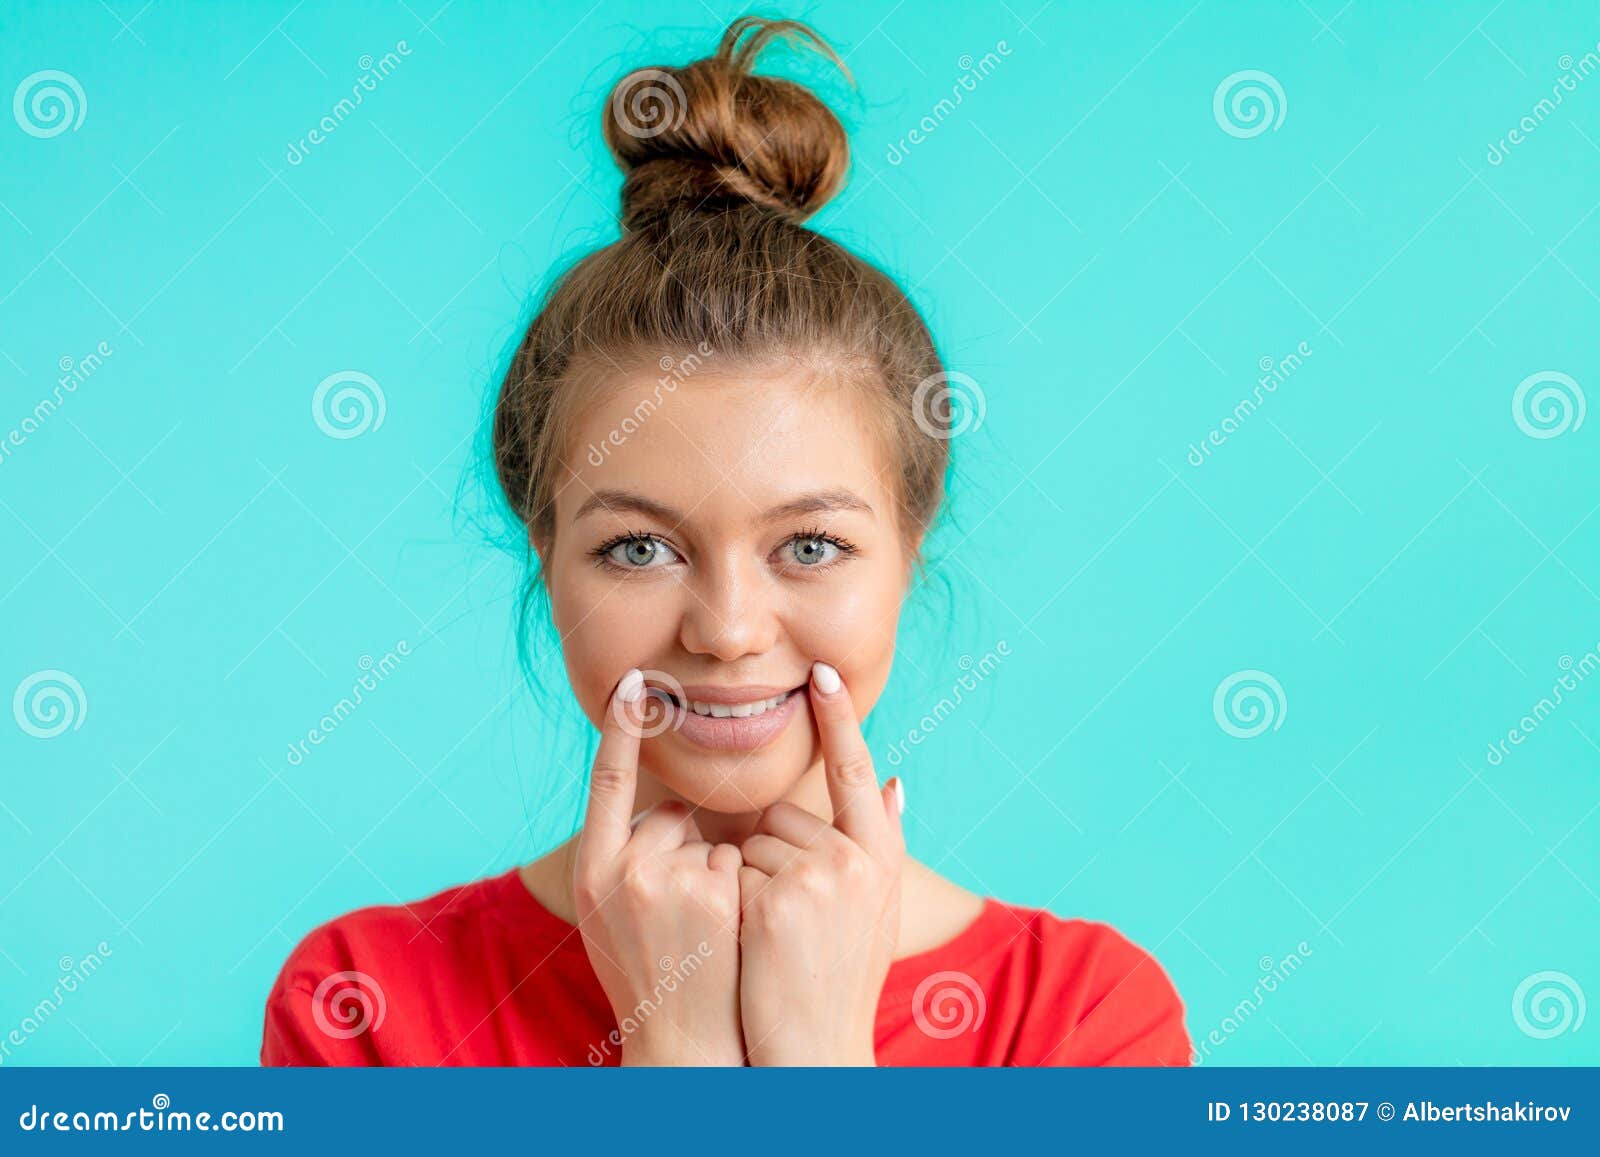 Beautiful Girl with a Fake Smile Looking at the Camera Stock Image ...